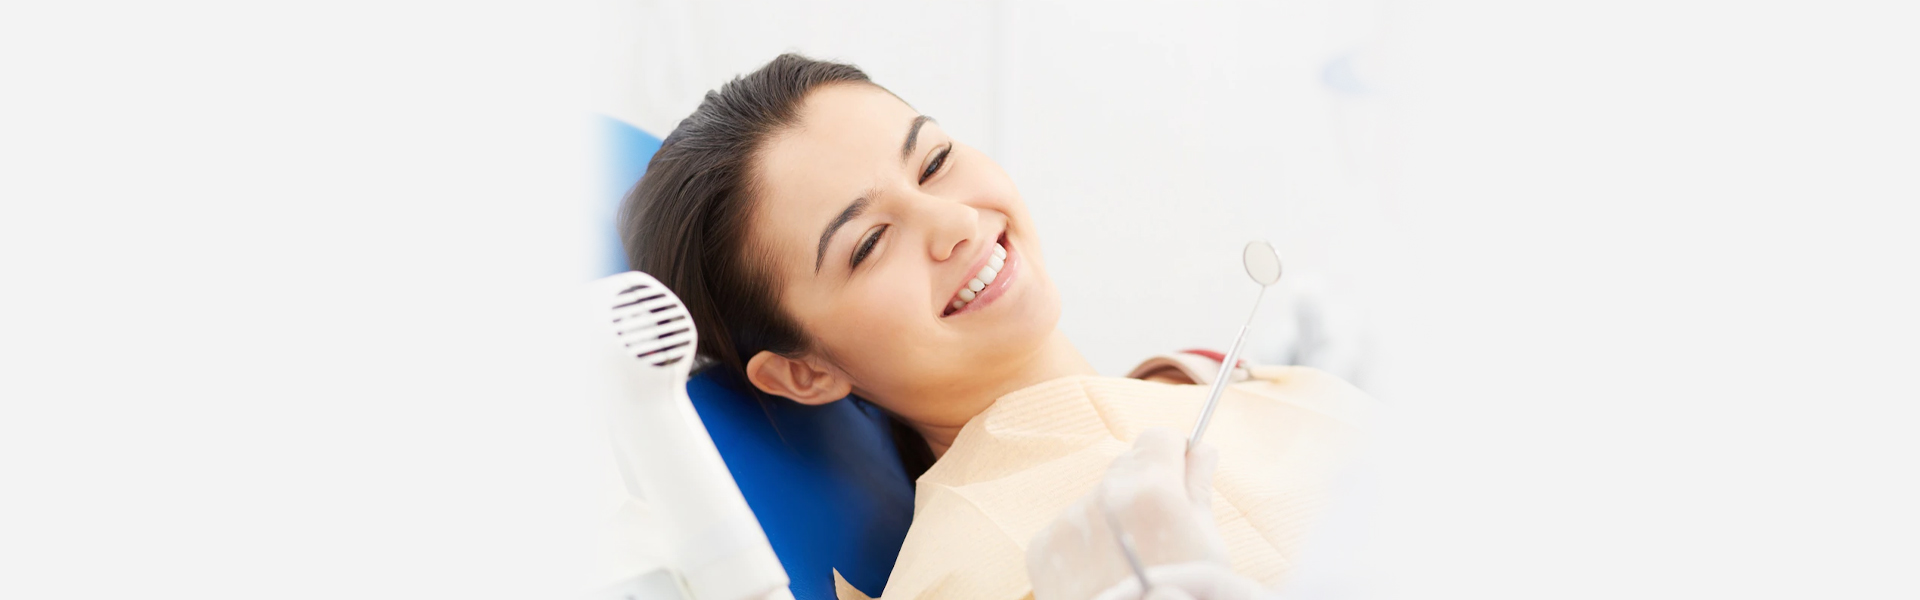 What Are the Four Types of Fillings? Which Type of Filling Is Best for Teeth